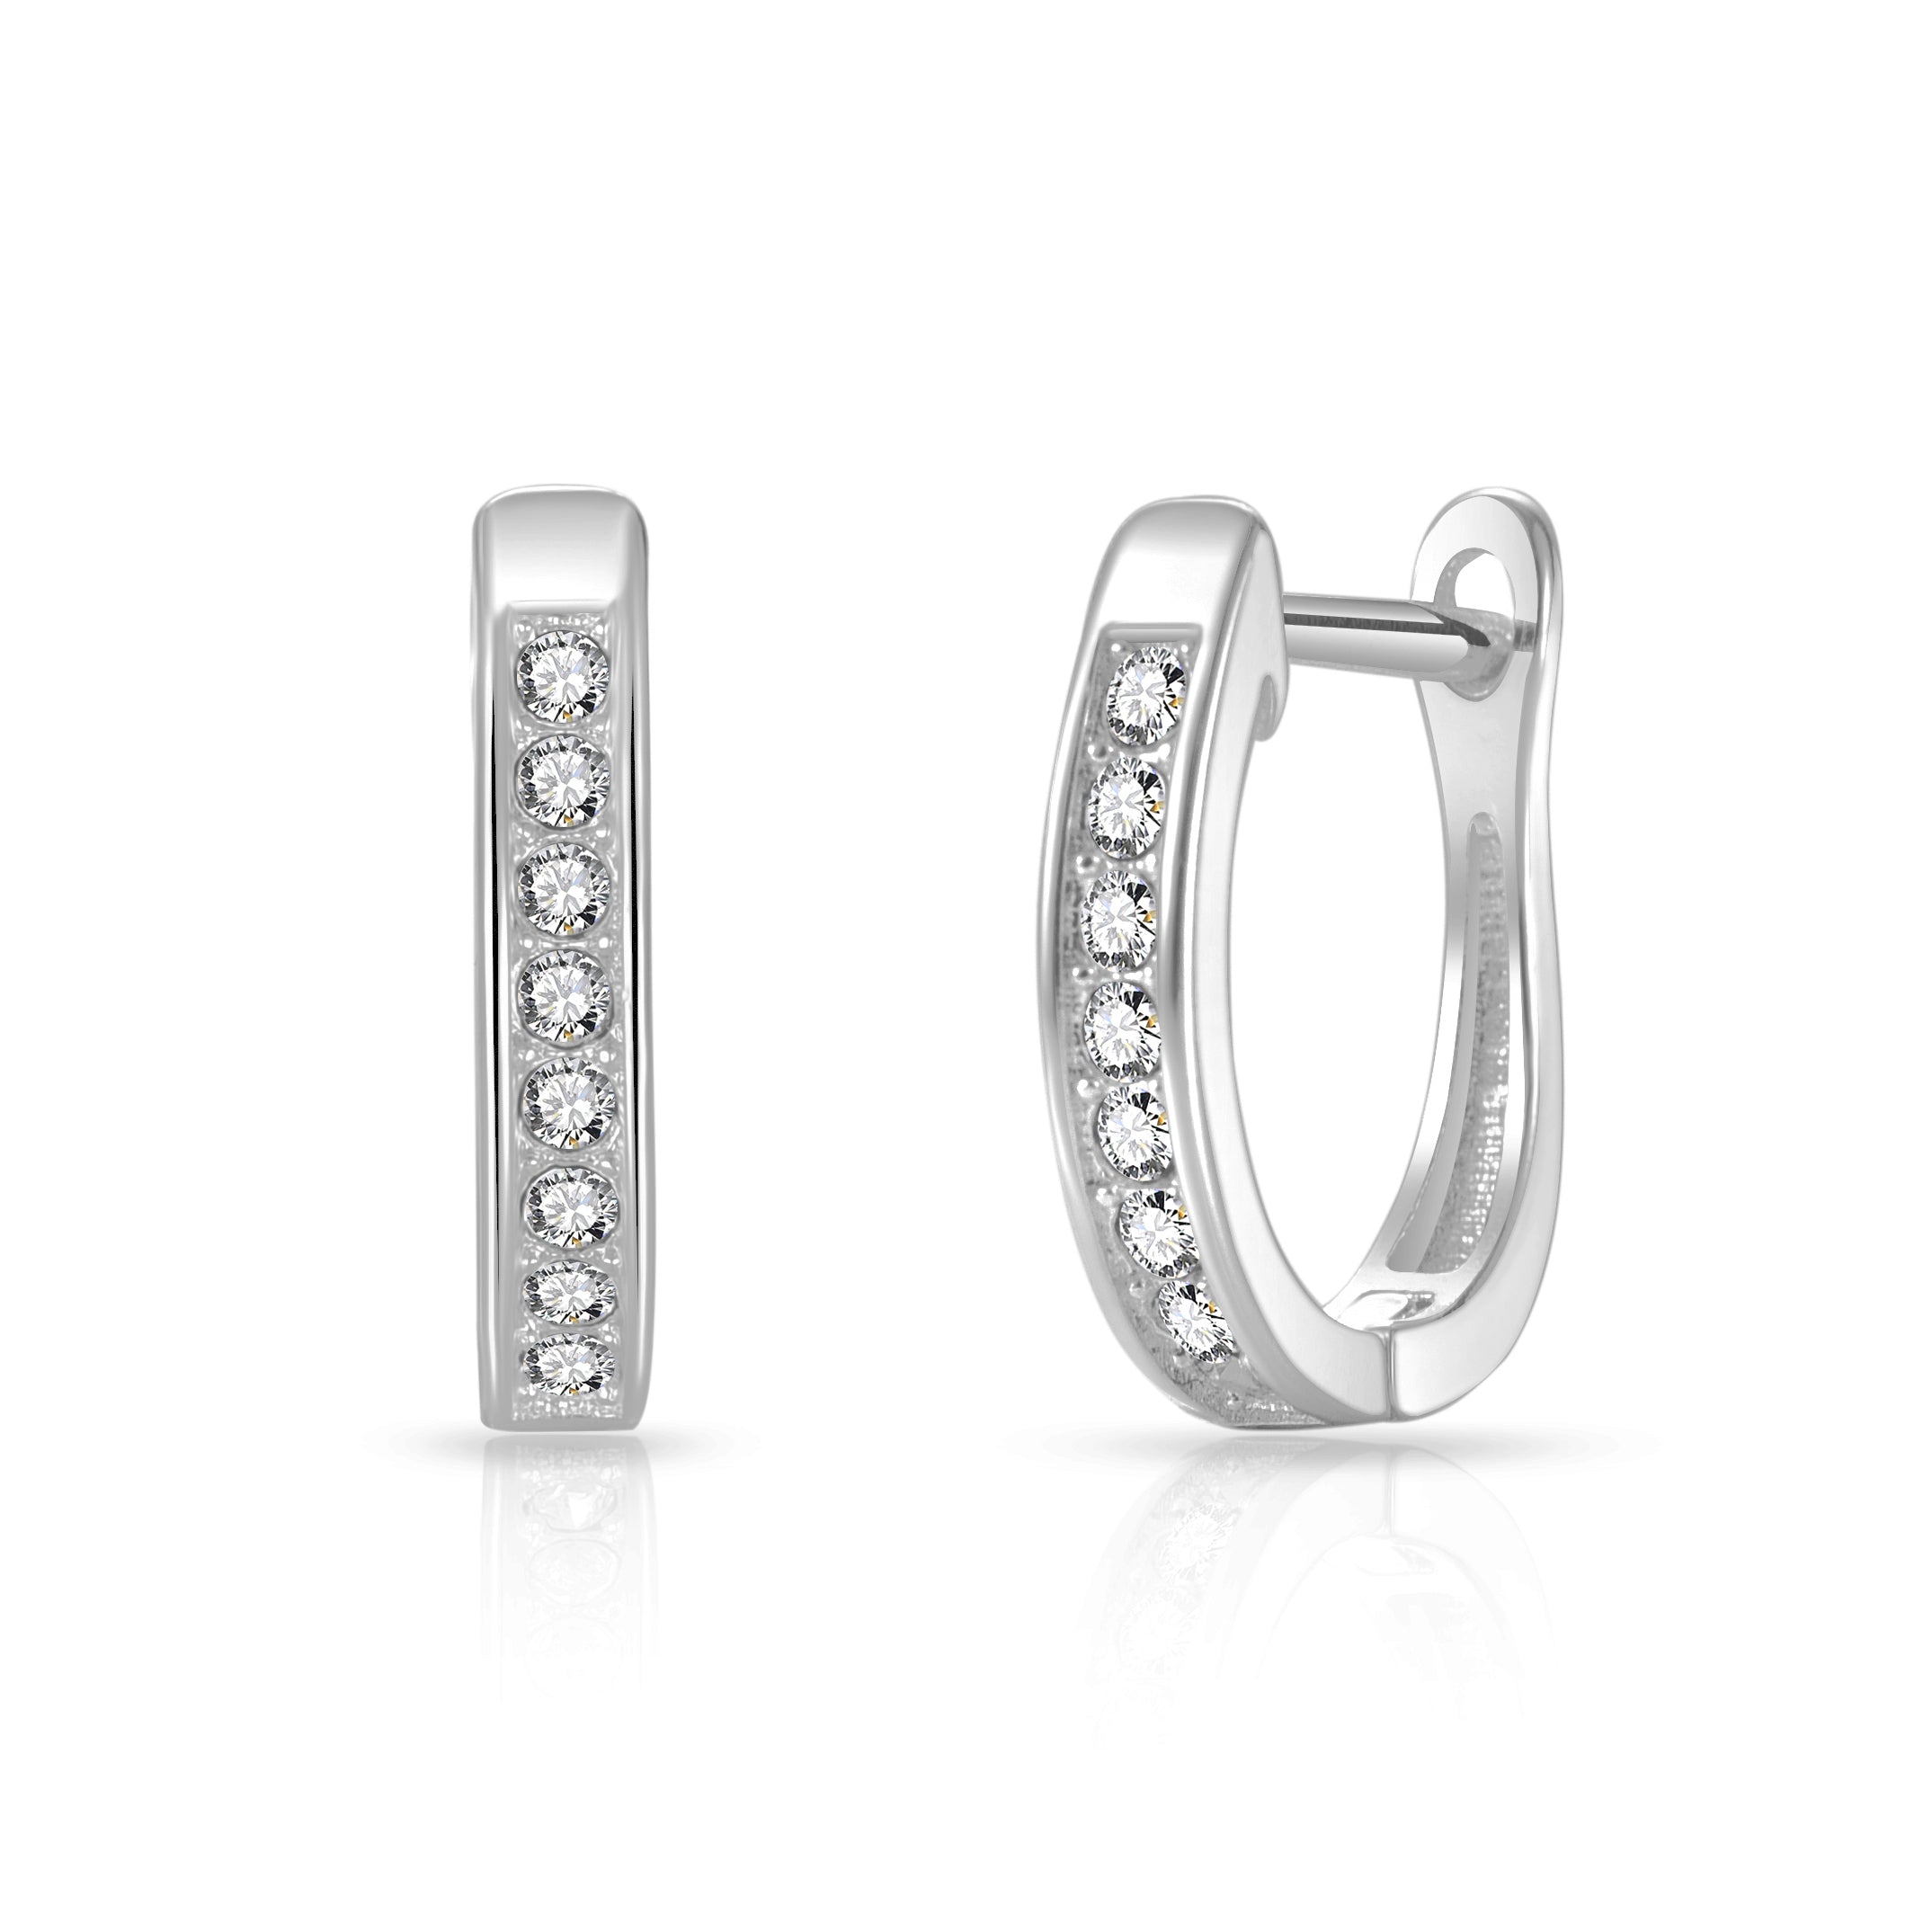 Silver Plated Channel Set Hoop Earrings Created with Zircondia® Crystals